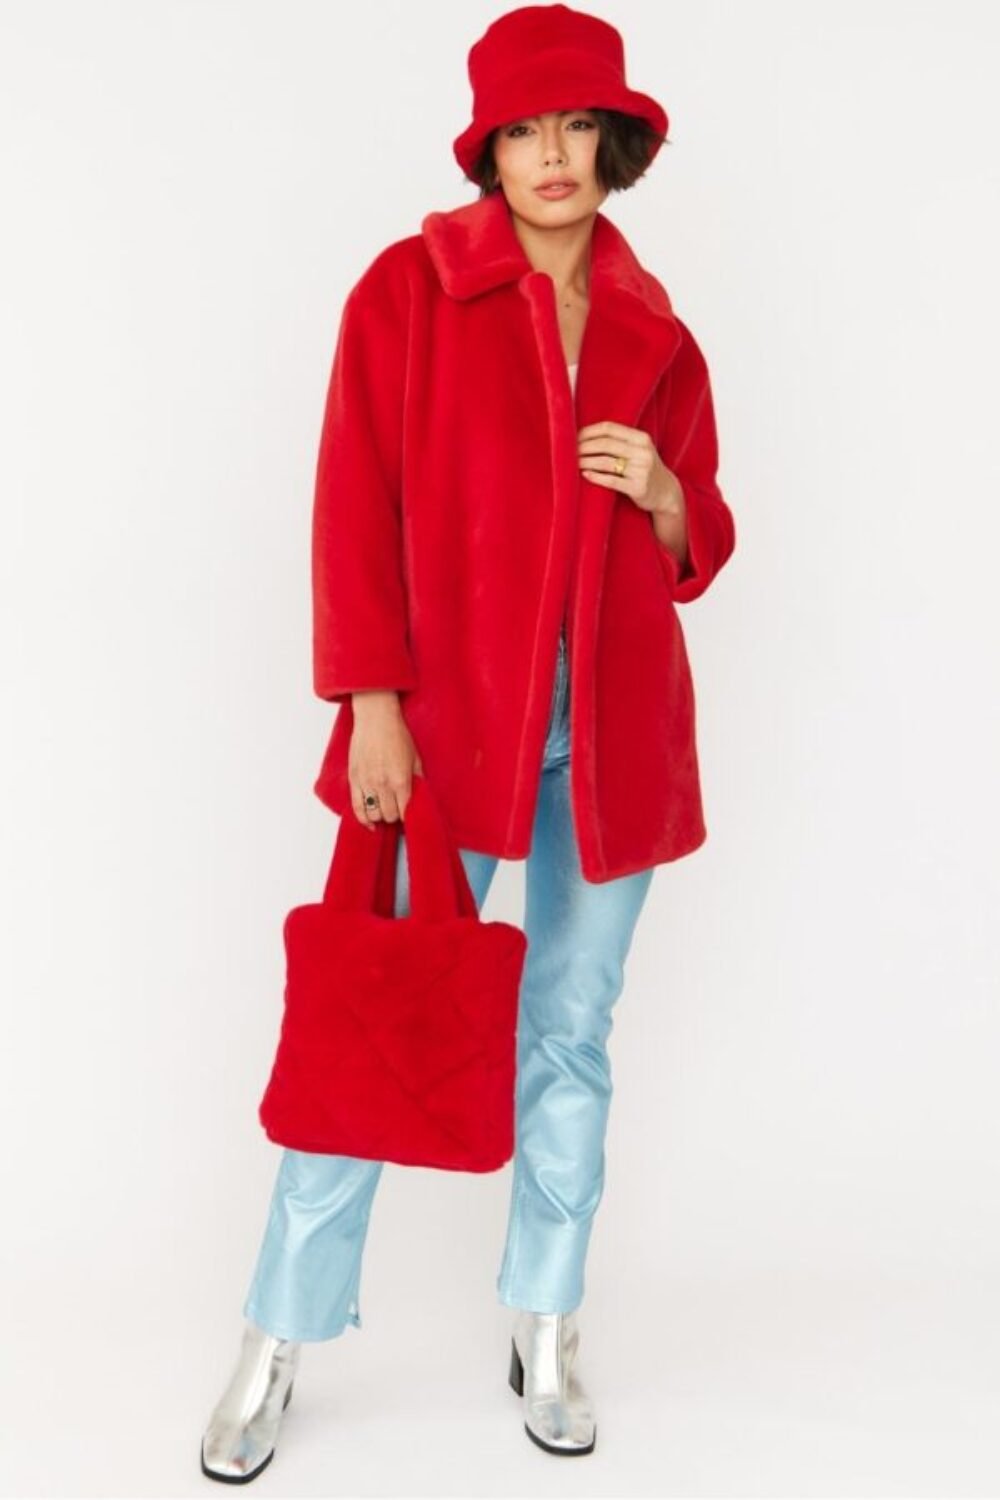 Shop Lux Red Faux Fur Duchess Midi Coat and women's luxury and designer clothes at www.lux-apparel.co.uk